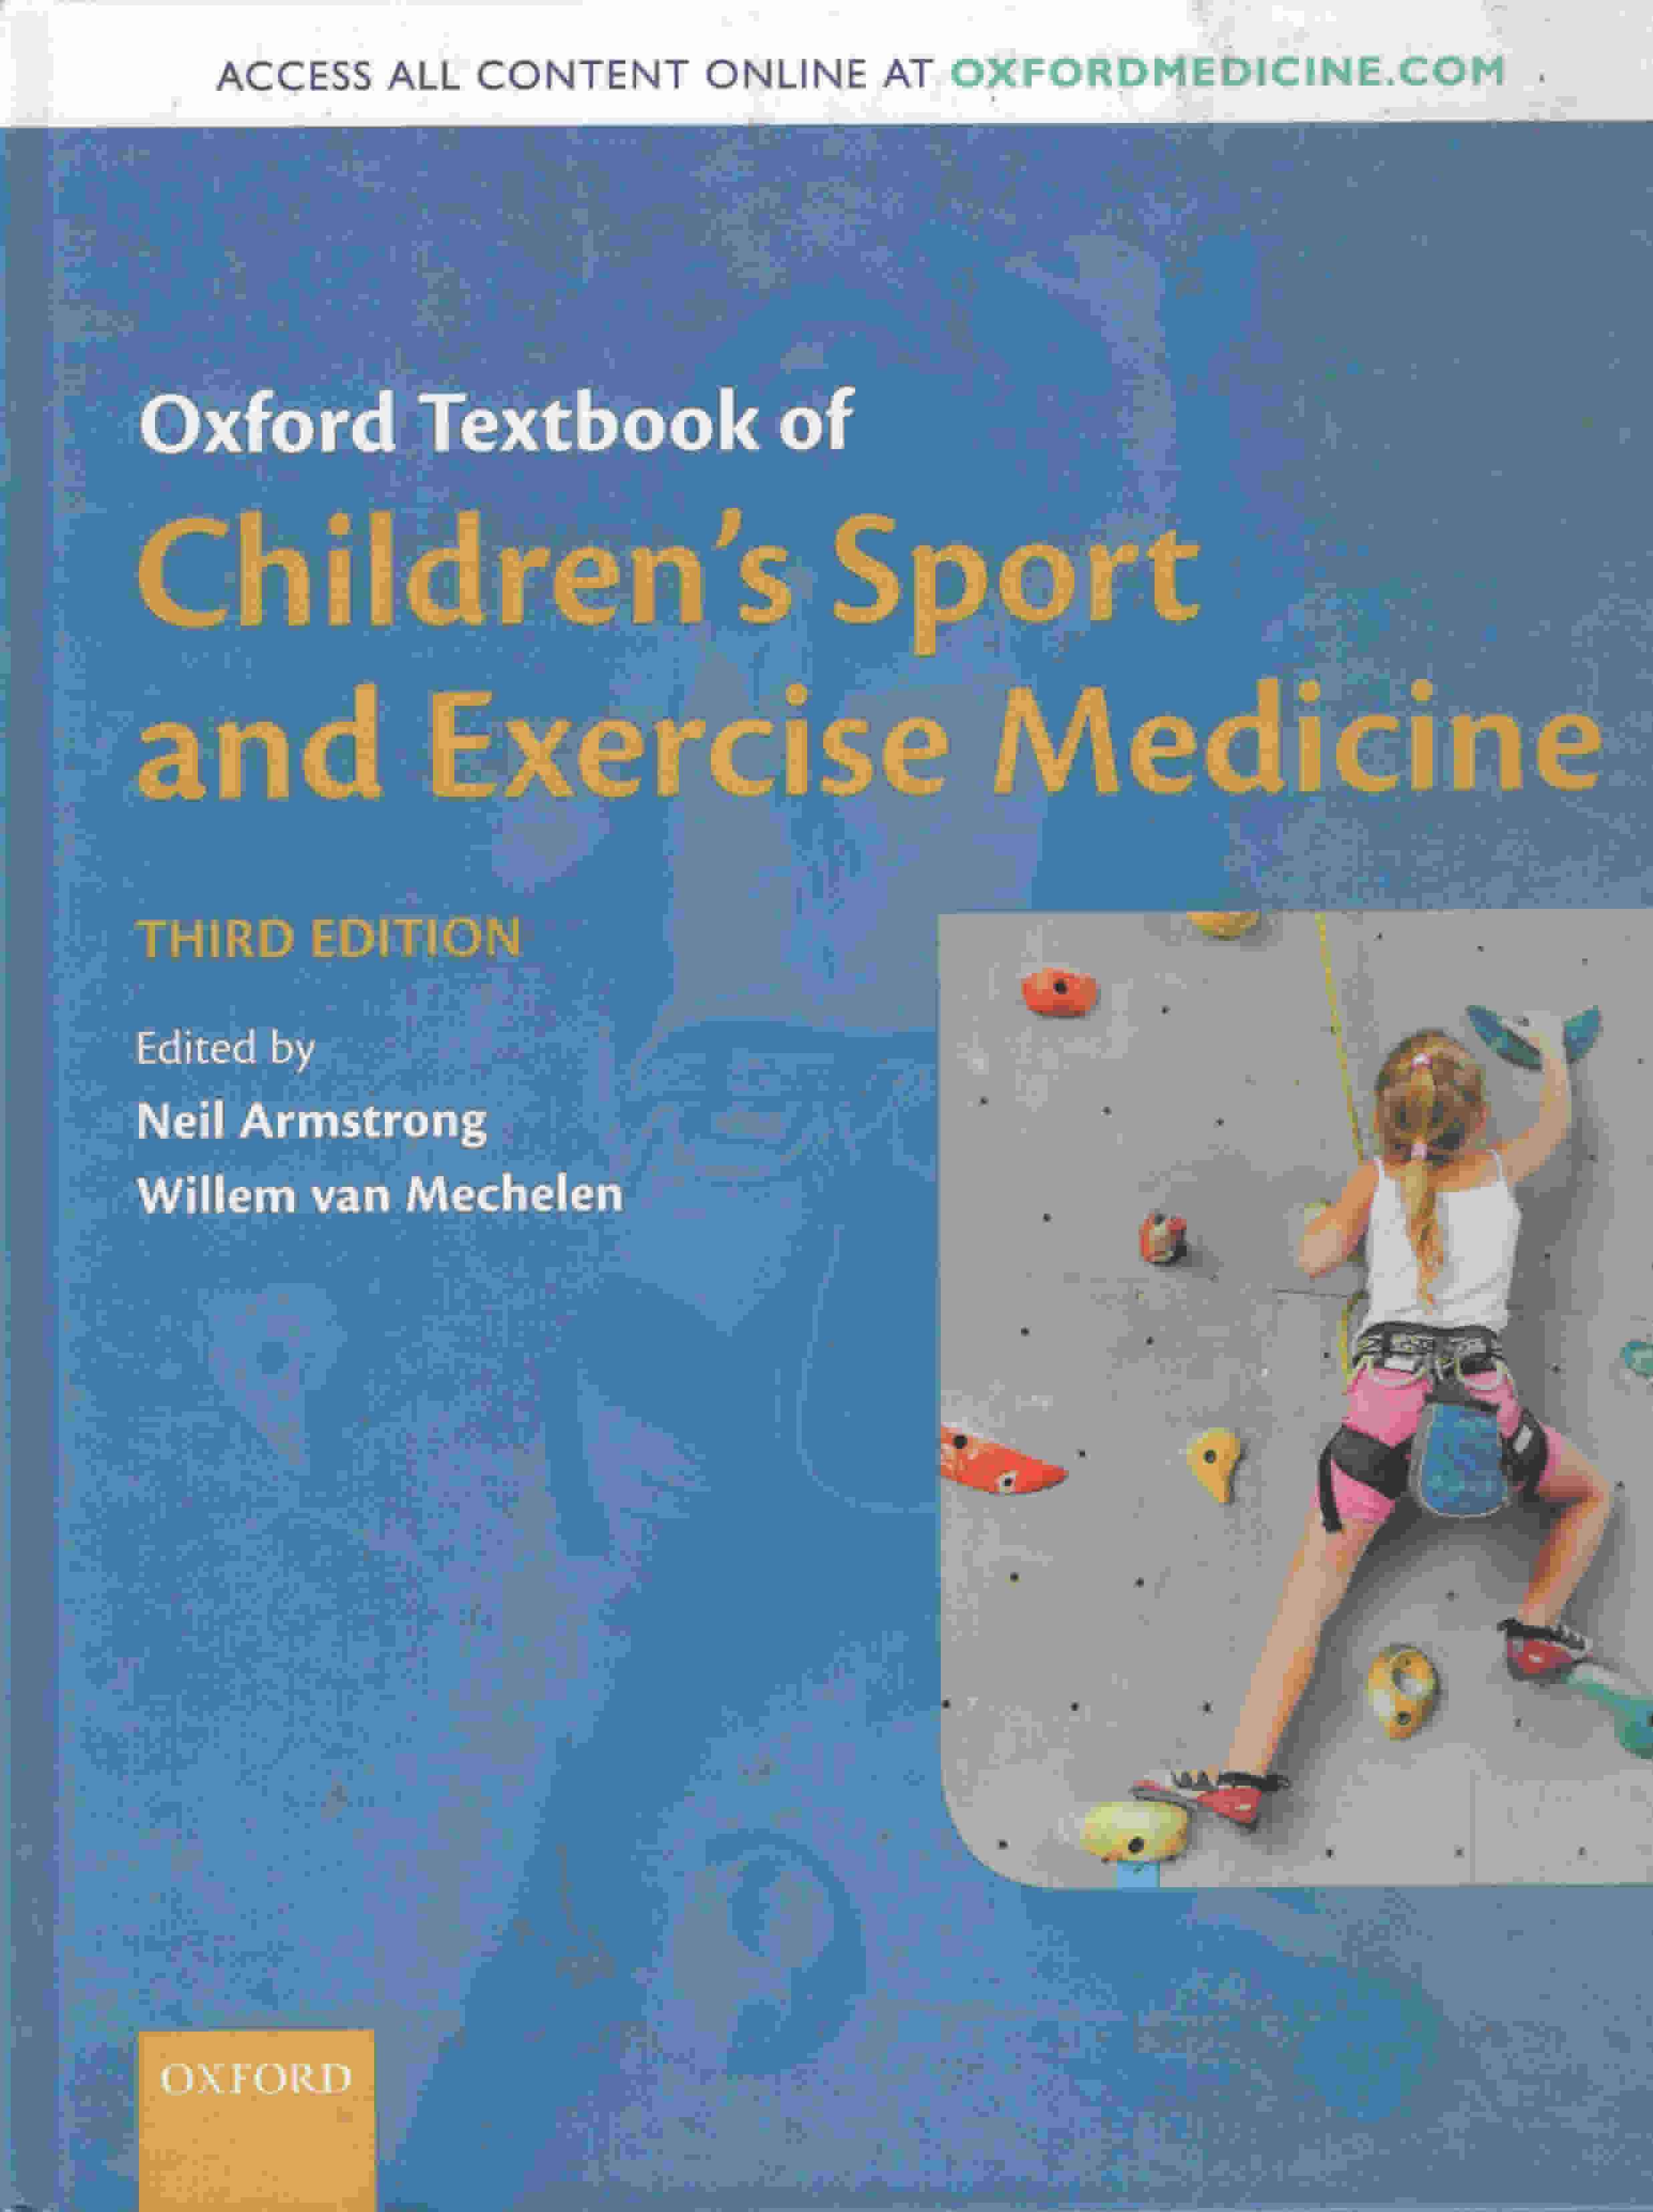 OXFORD TEXTBOOK OF CHILDREN'S SPORT AND EXERCISE MEDICINE